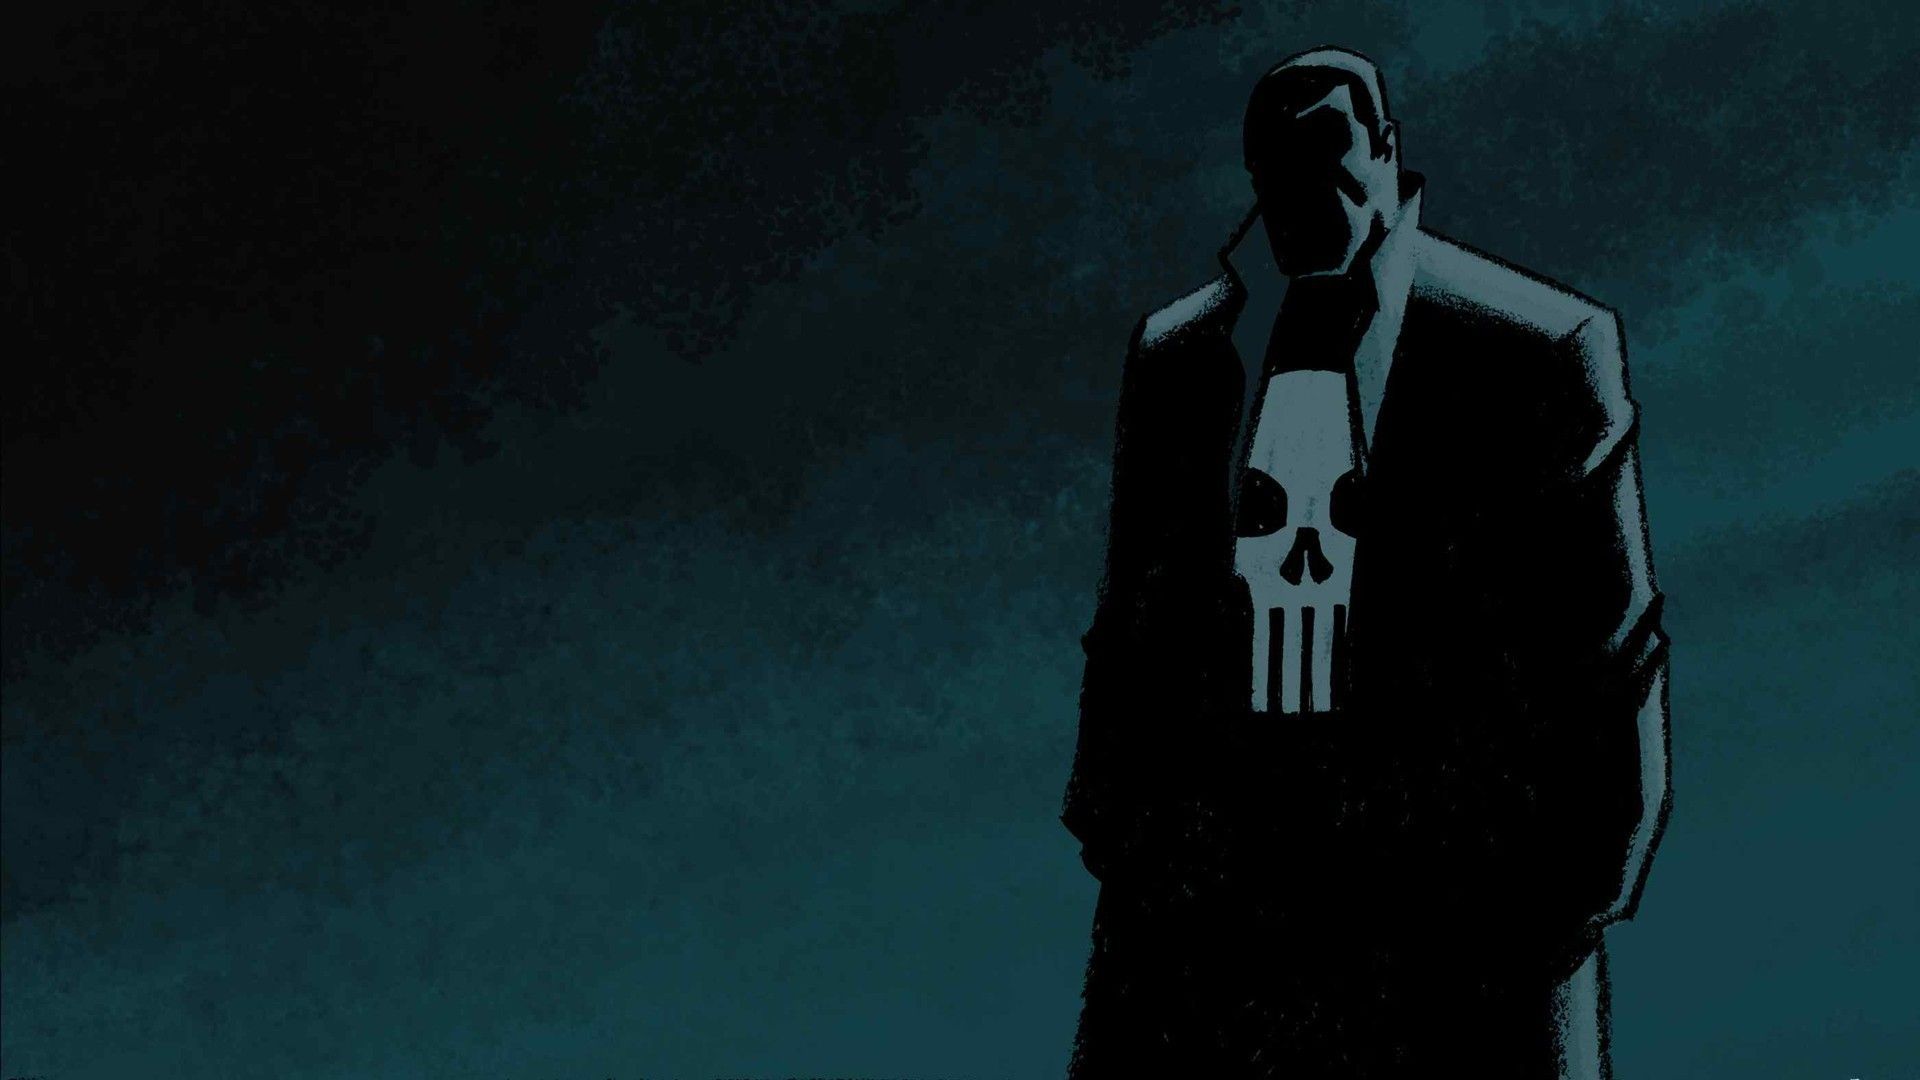 Mysterious man picture wallpaper. Dc comics wallpaper, Marvel movies, Punisher